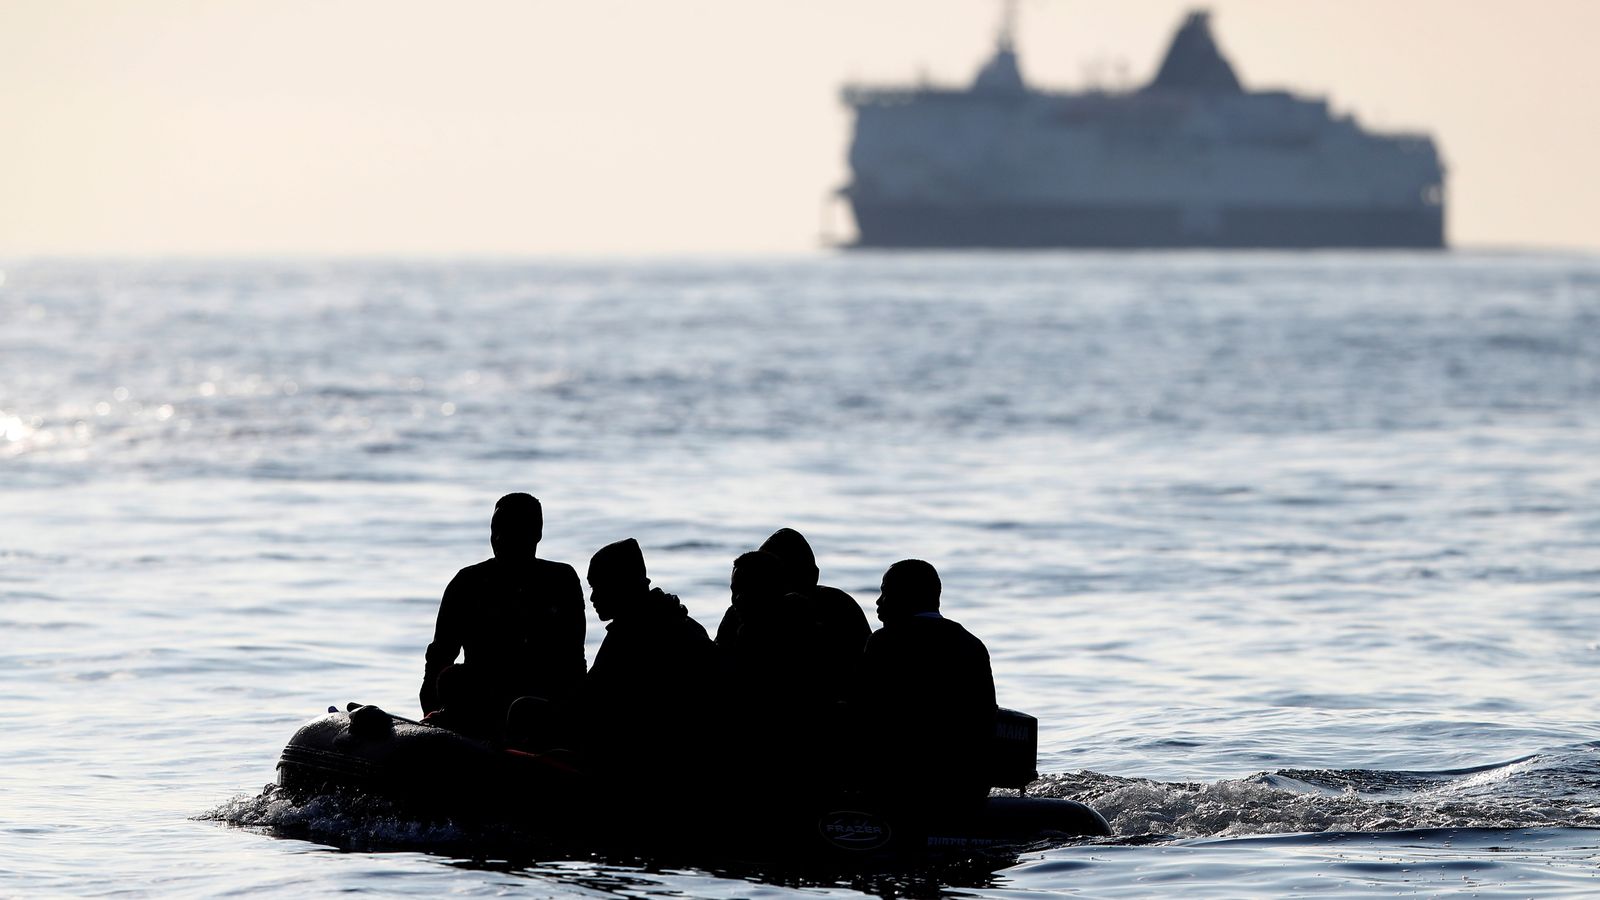 More than 100,000 people have now crossed the Channel in small boats since records began